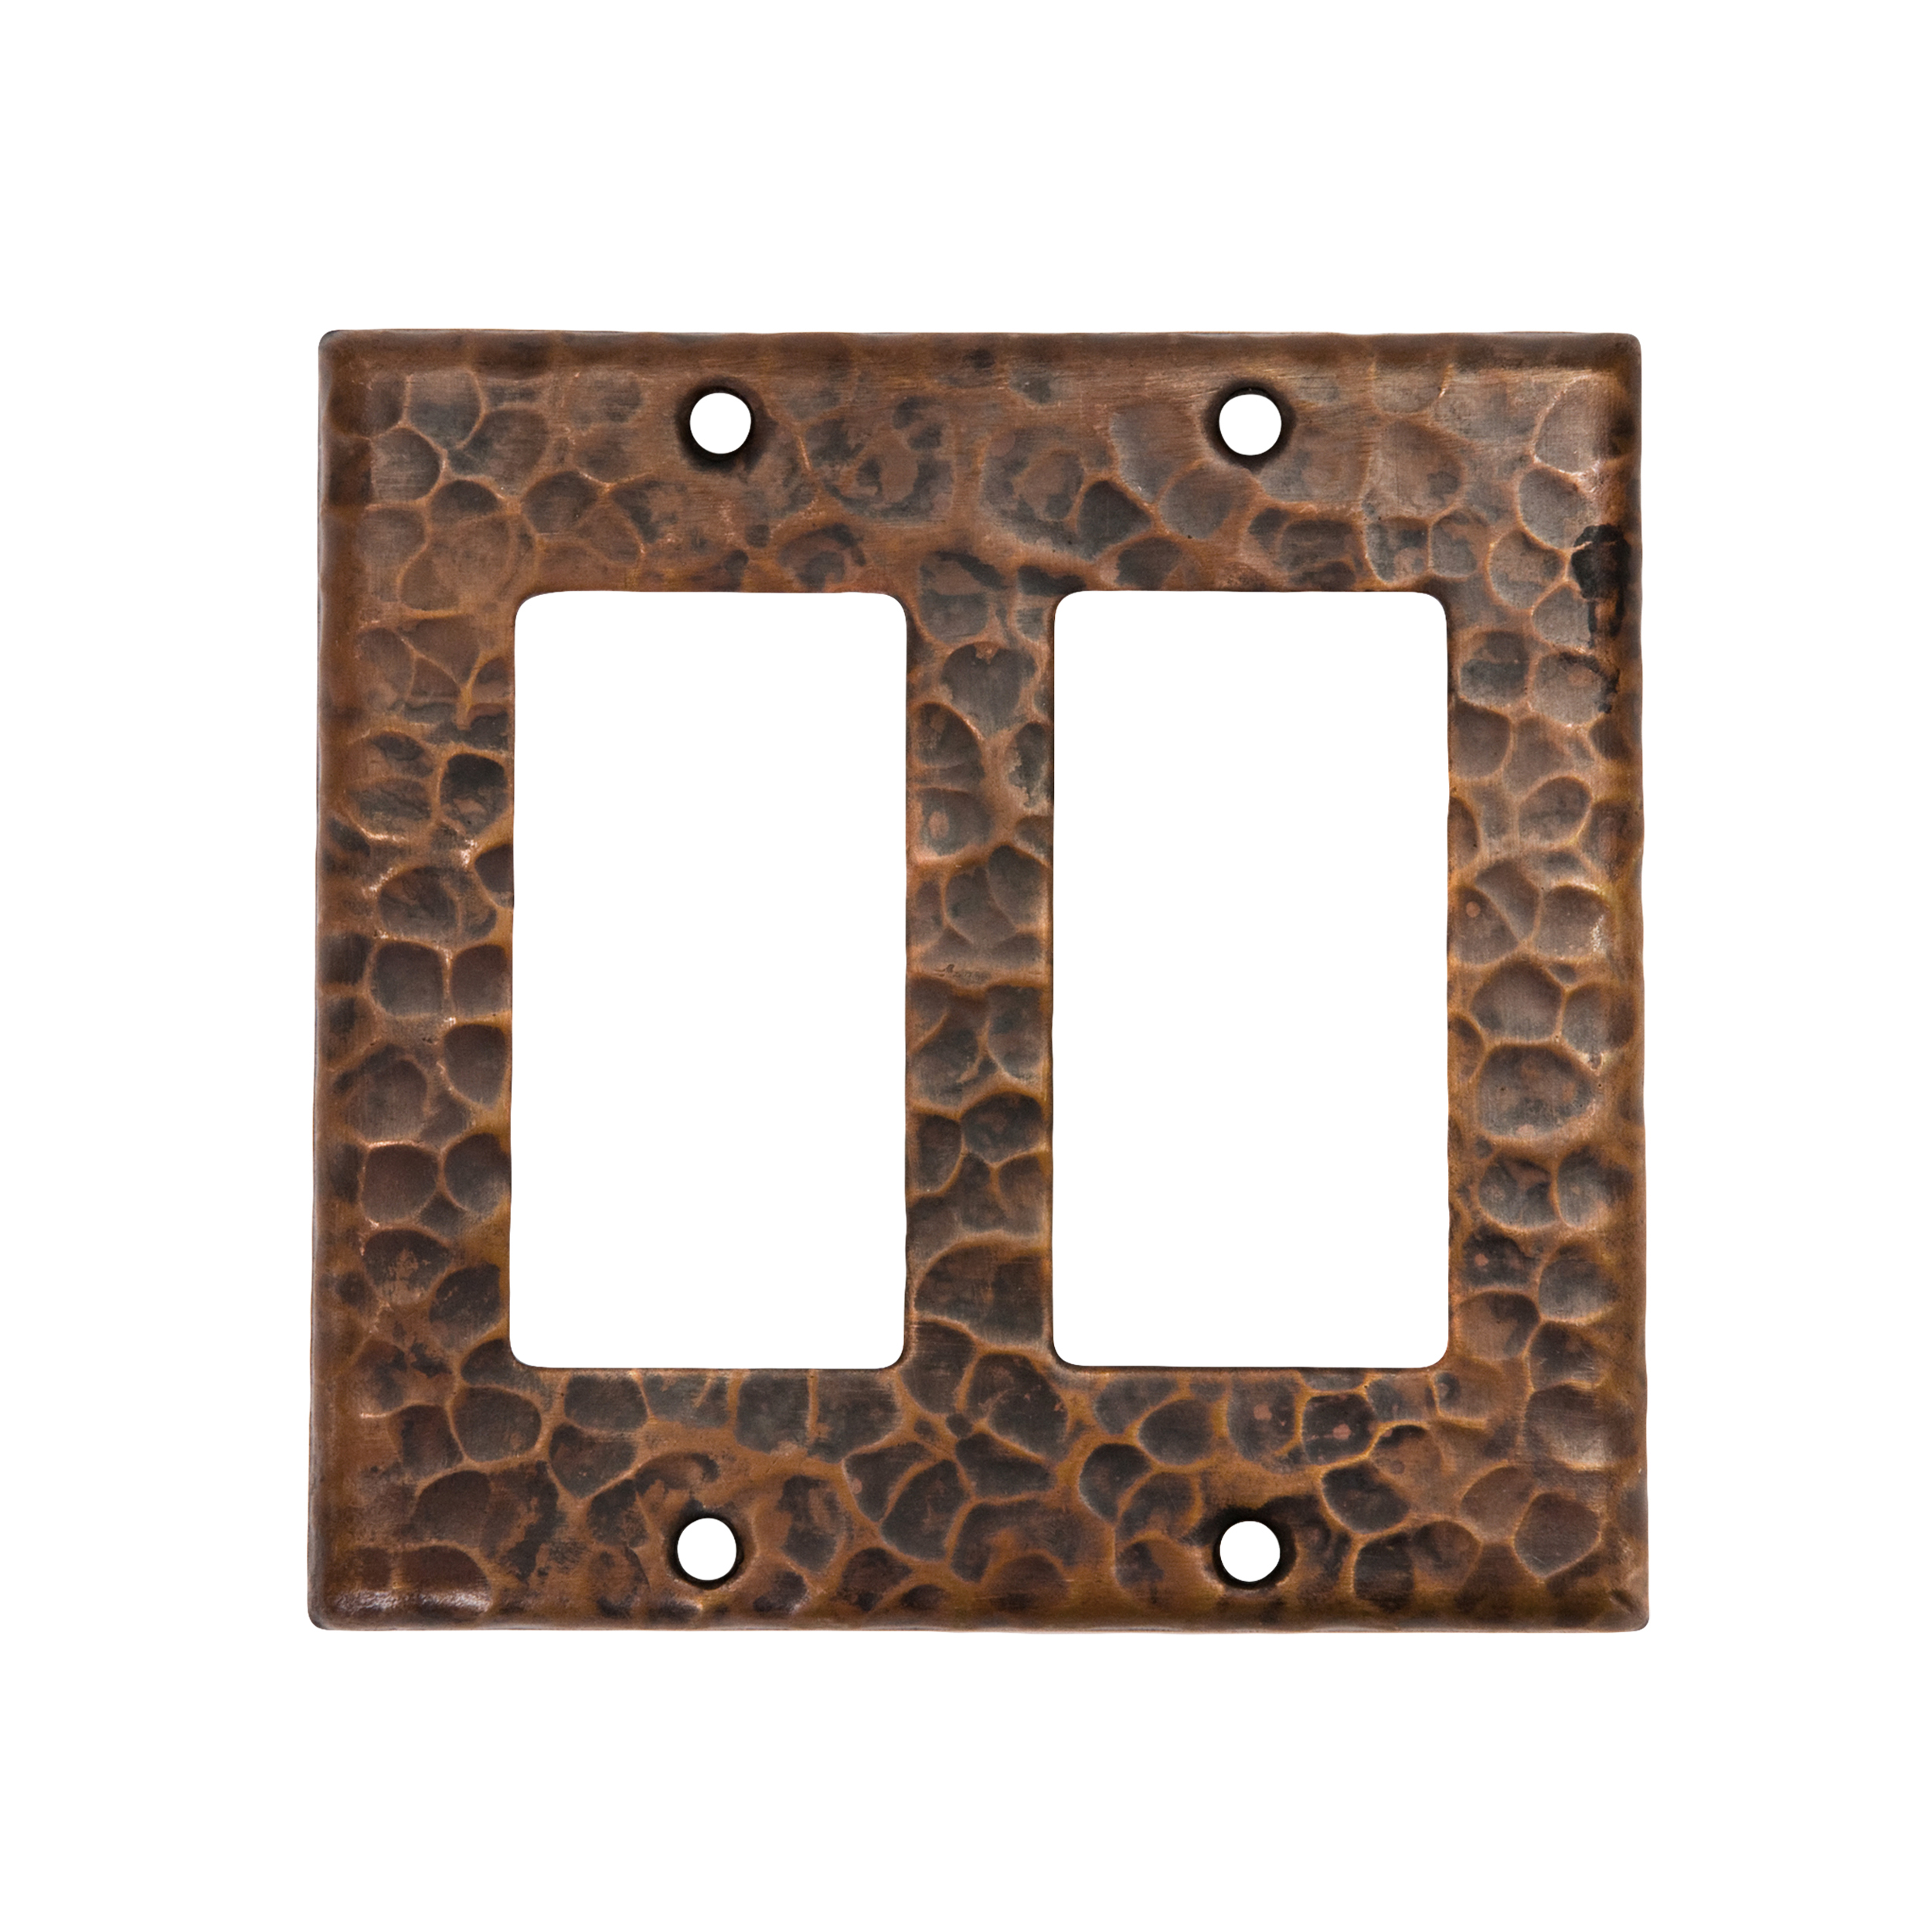 Double Ground Fault / Rocker Gfi Switchplate Cover